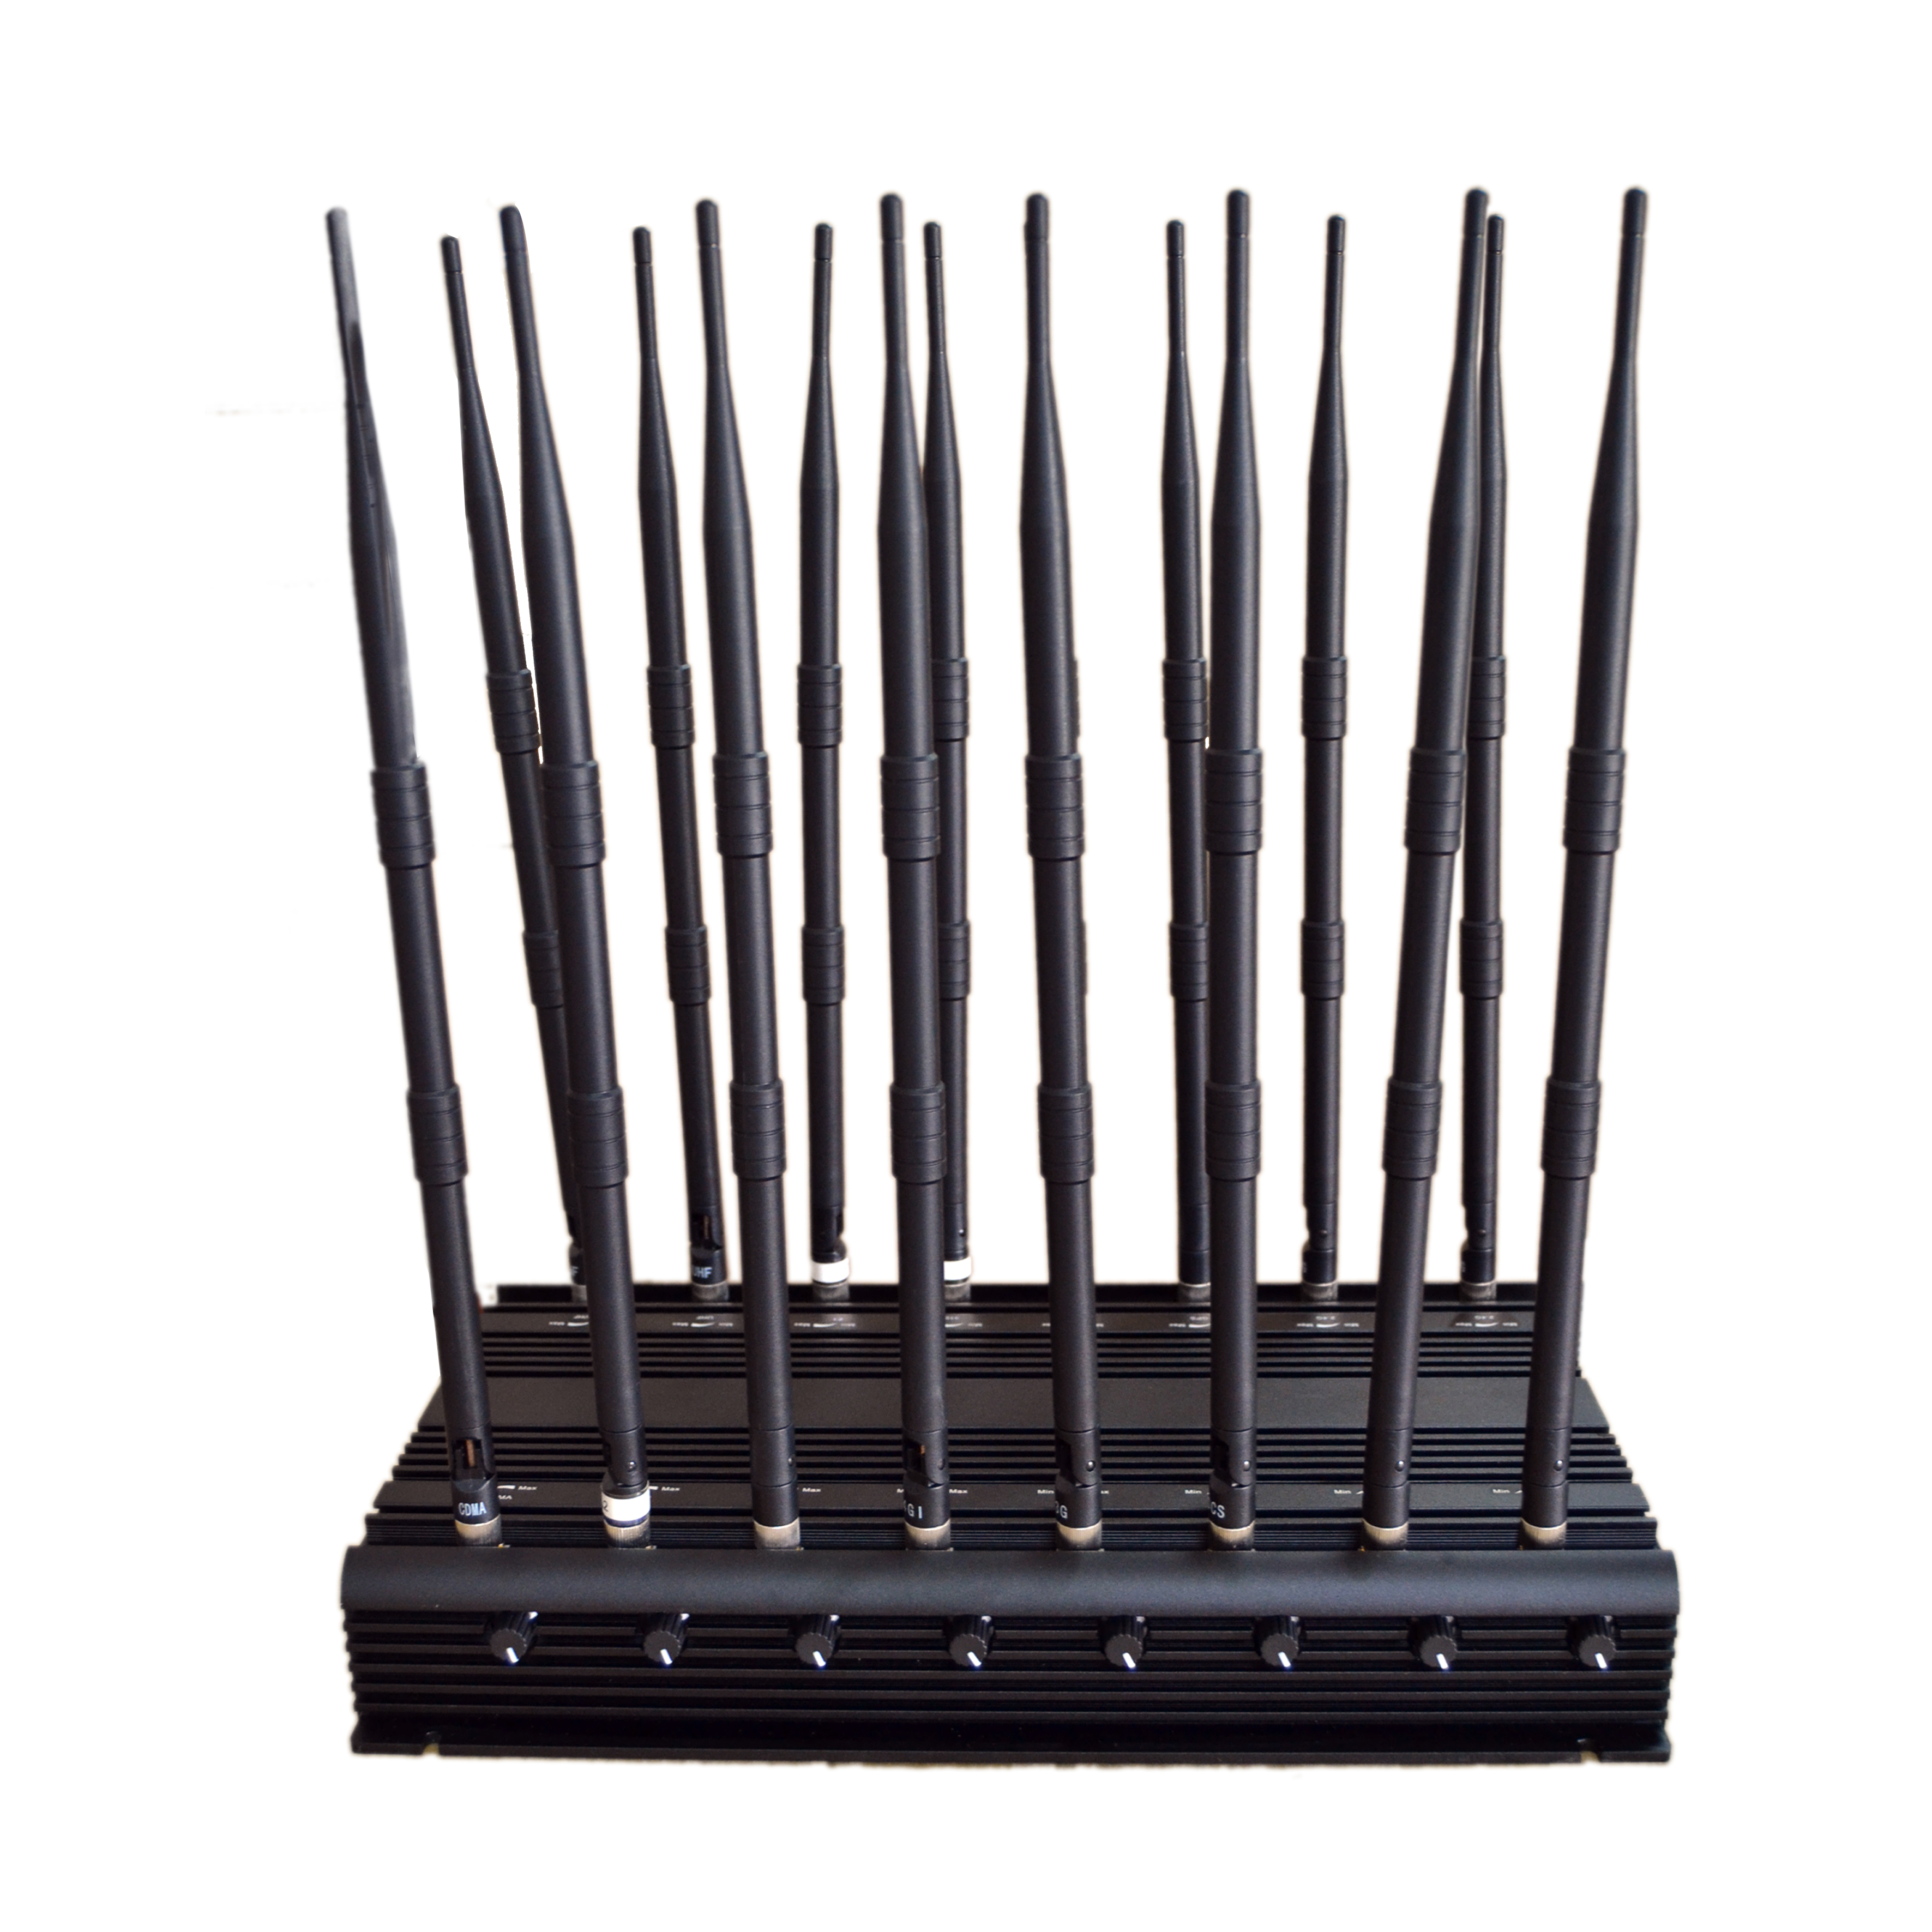 jammer nut goodie candy , 38w High Power Desktop Multi-Band WiFi GPS Mobile Signal Jammer